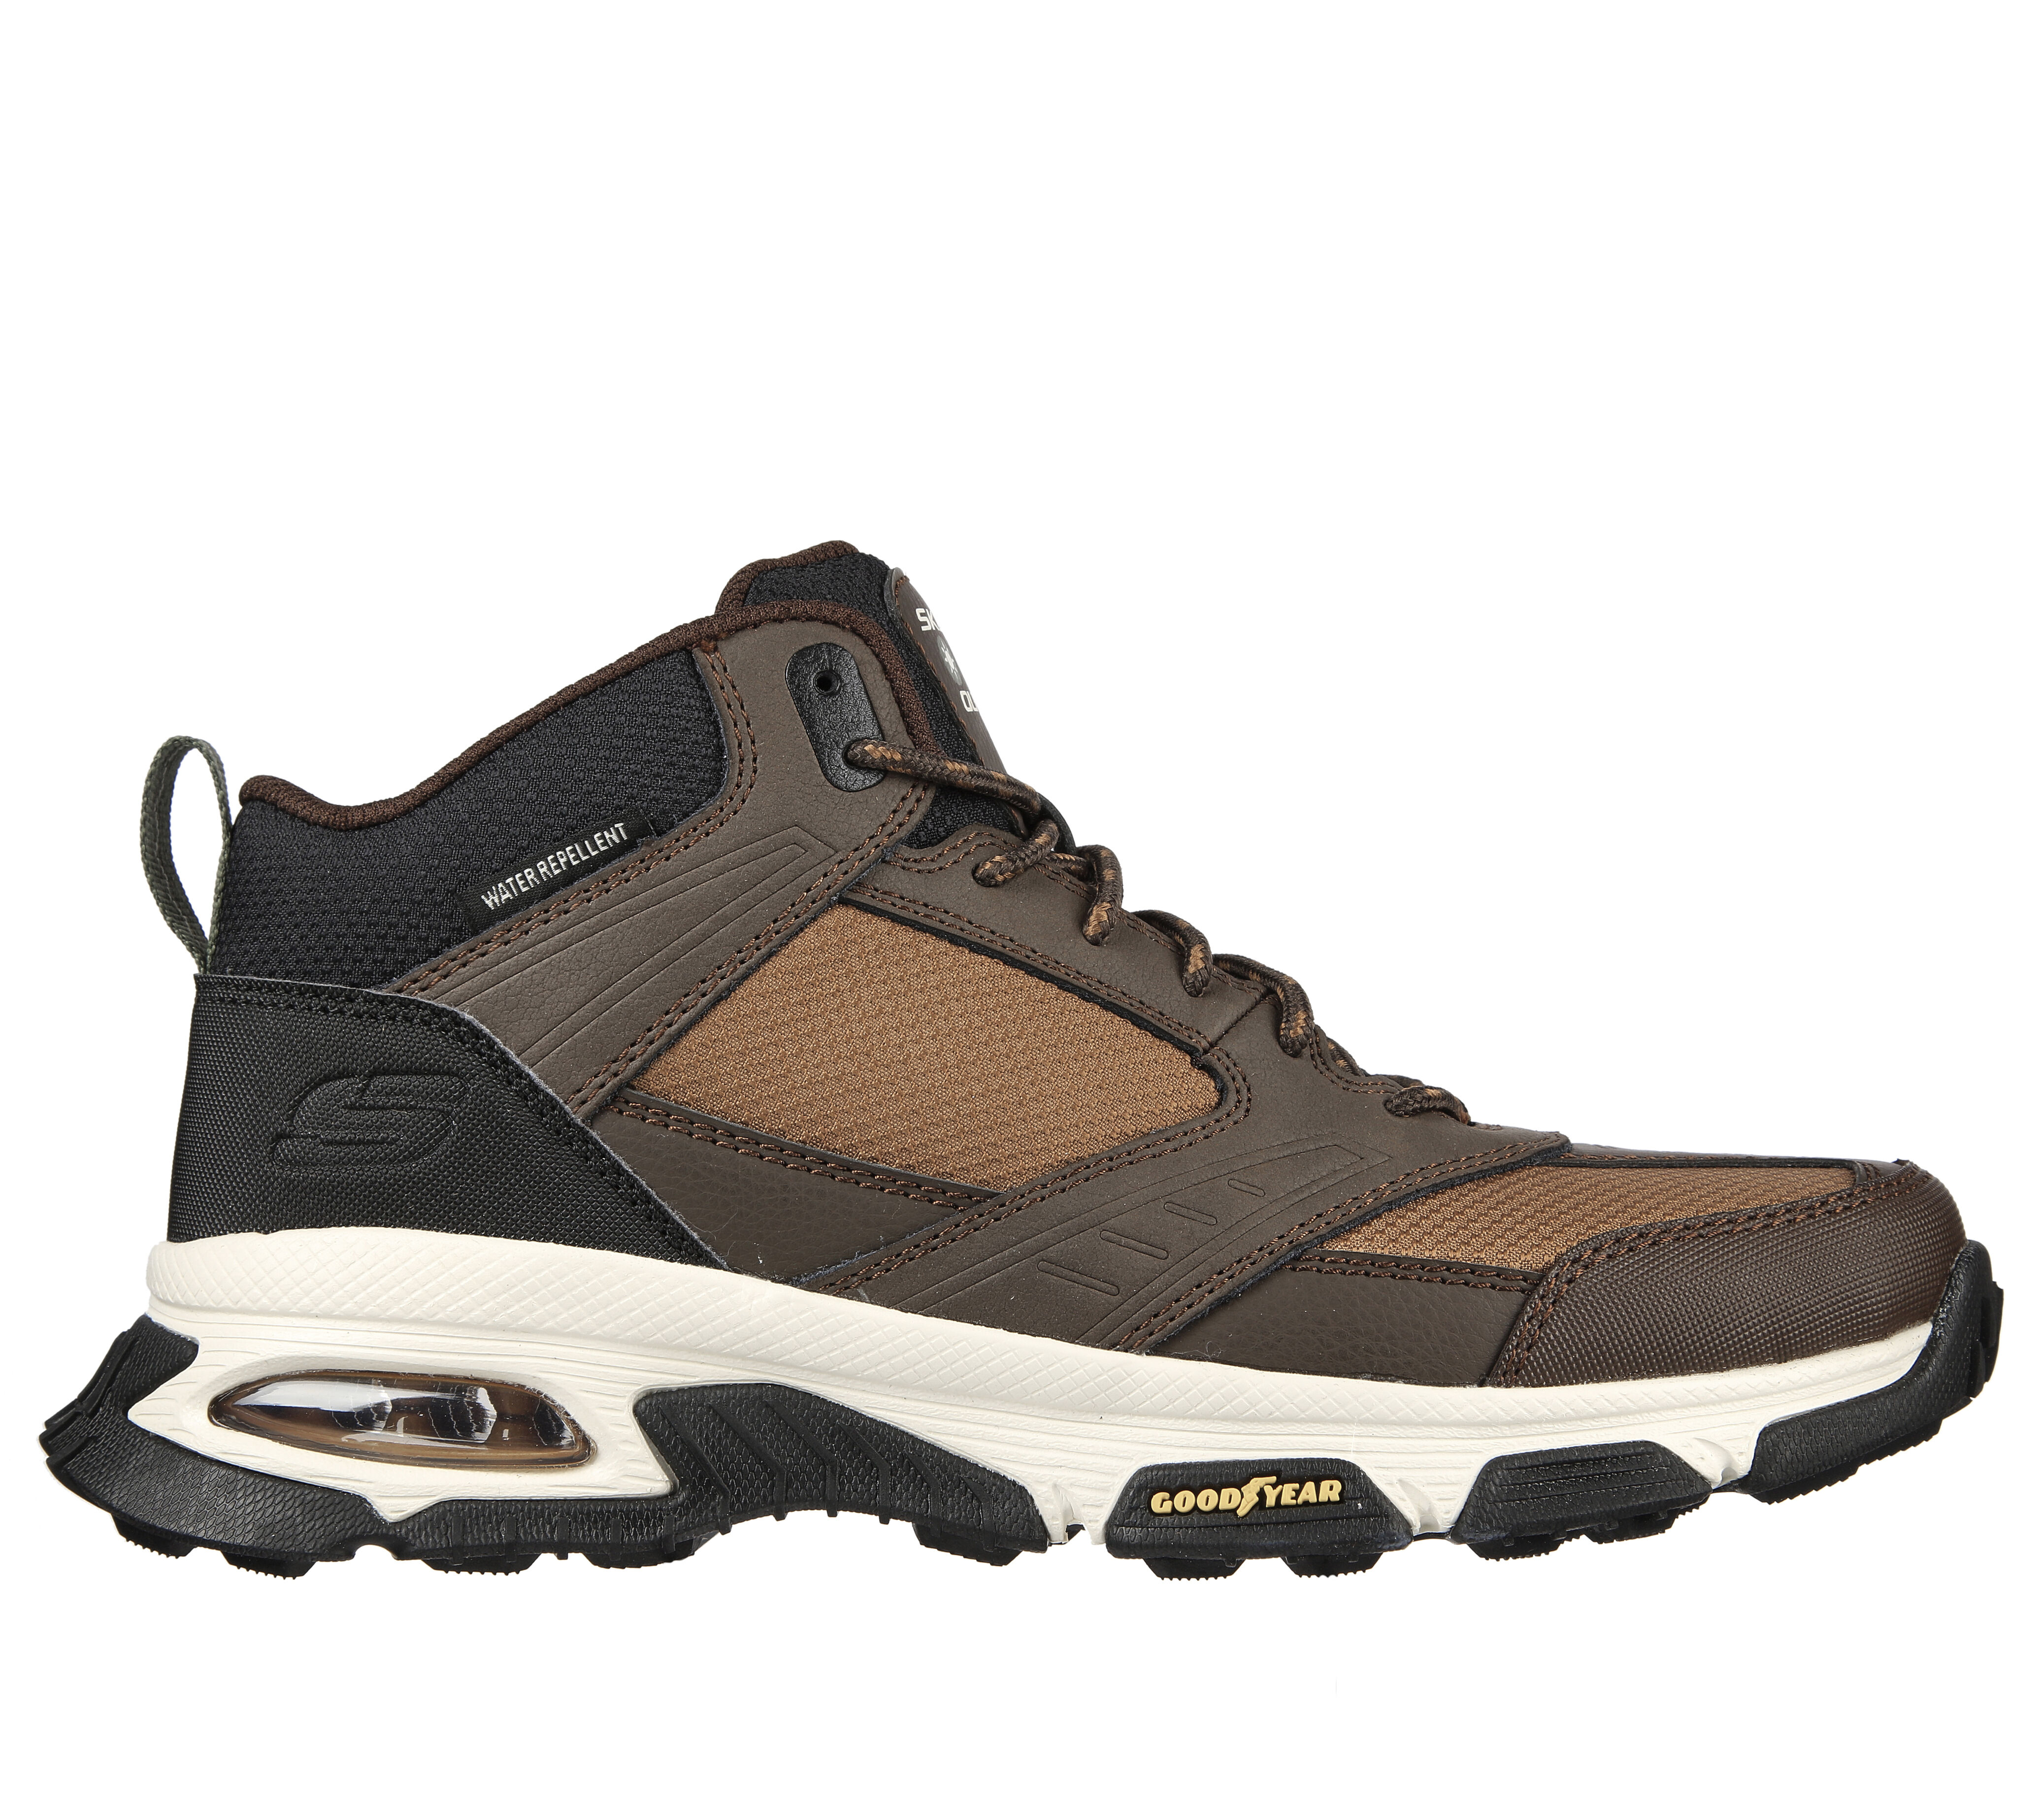 skechers safety shoes philippines price